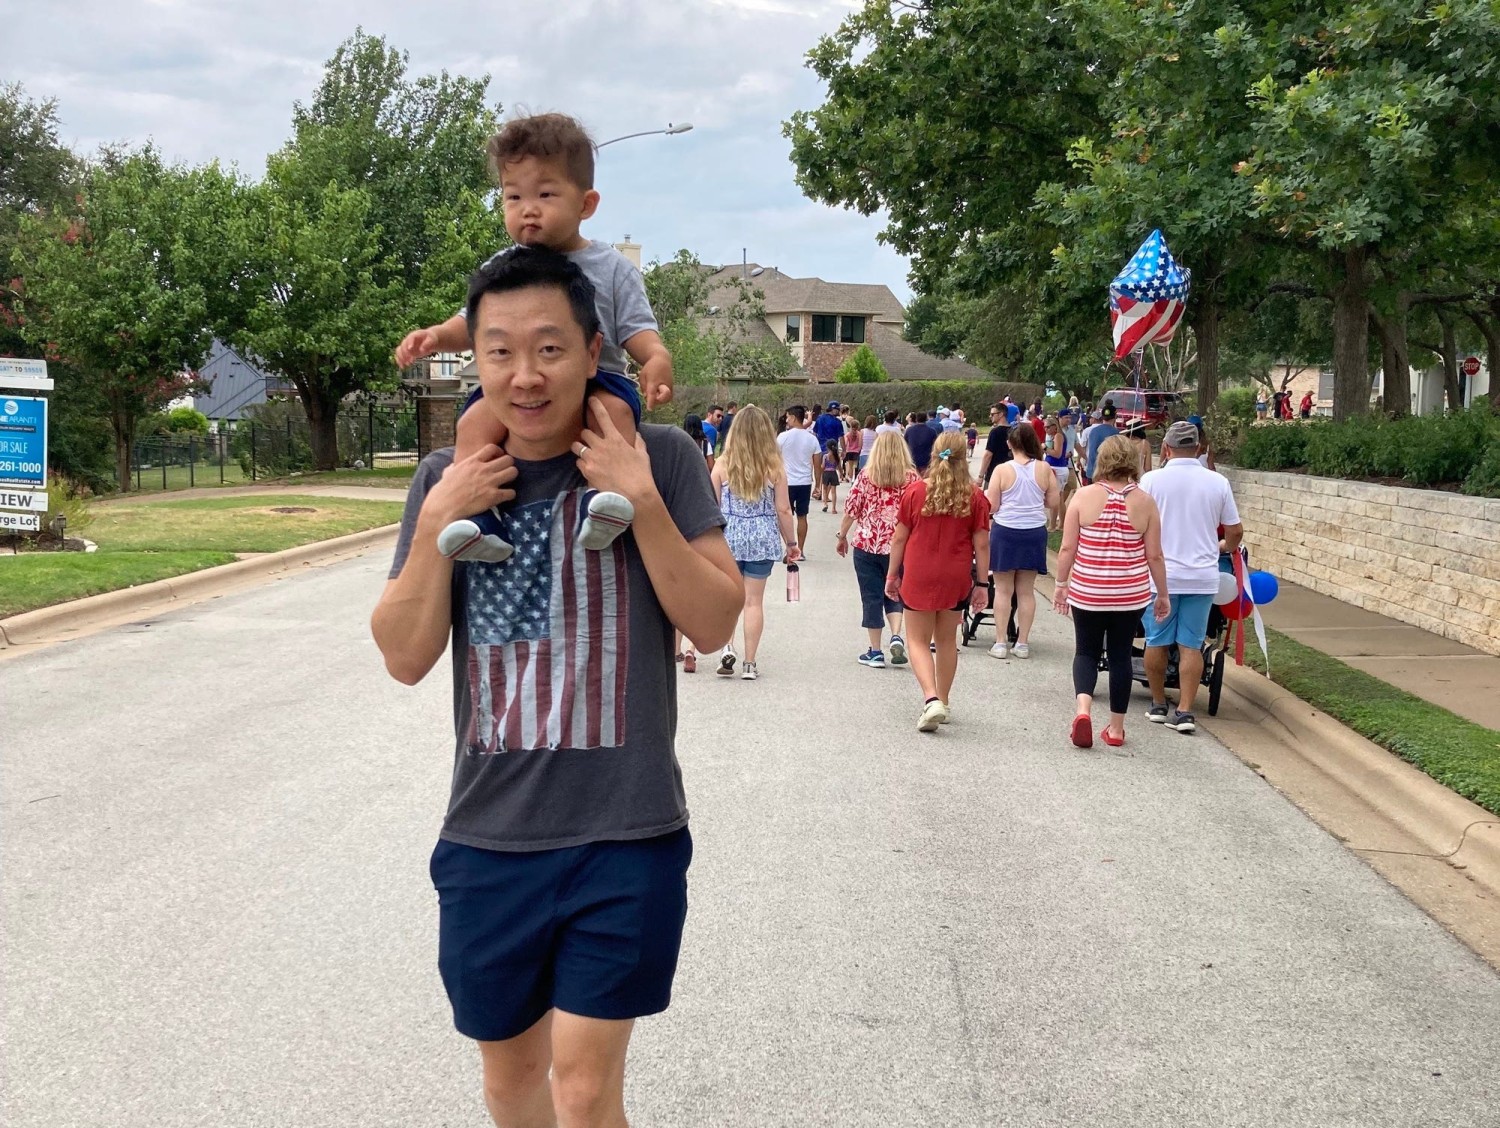 Pengyu Cheng and his son celebrating Independence Day in Texas. Courtesy of Pengyu Cheng.